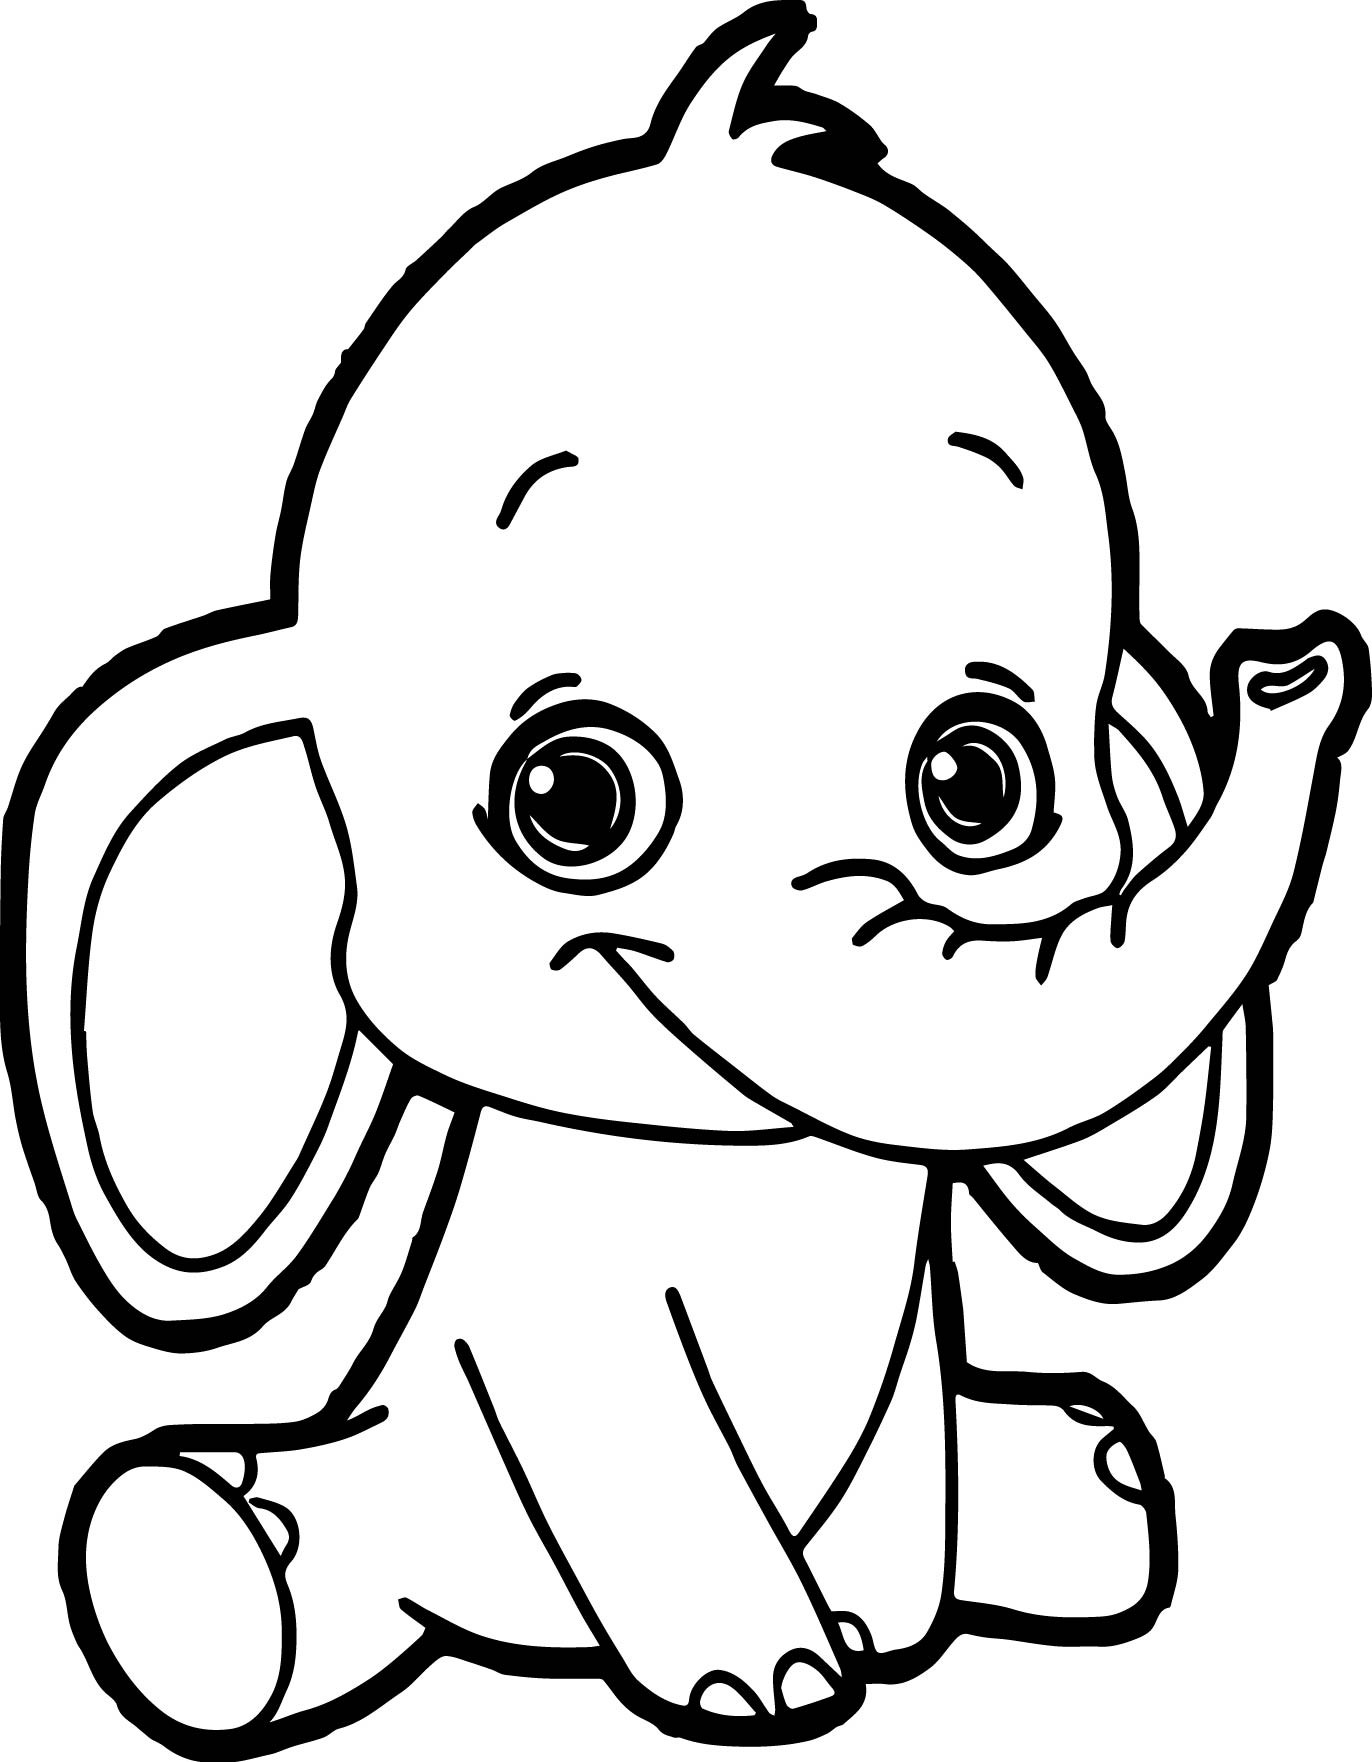 Baby Elephant Coloring Pages
 Baby Elephant Coloring Page